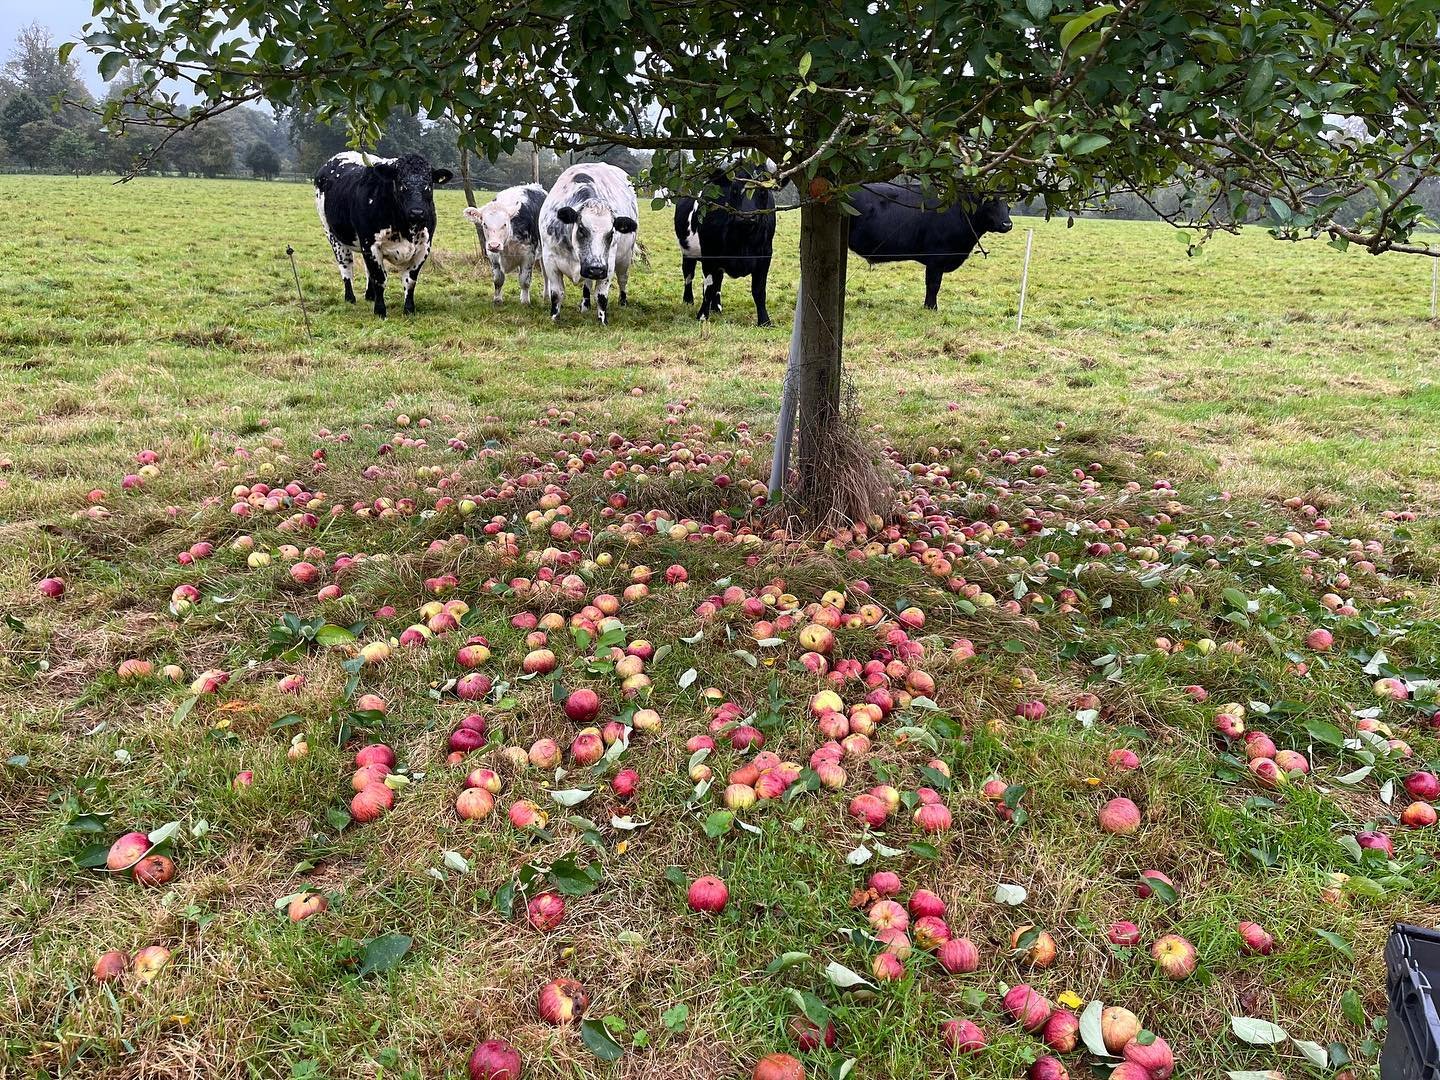 This was us at the weekend, scrabbling around on the orchard floor picking up the last of the Dabinetts before the cows munch them all. This is a cider variety, not popular in Suffolk, so worth going the extra mile for. Thanks Dick for your permissio